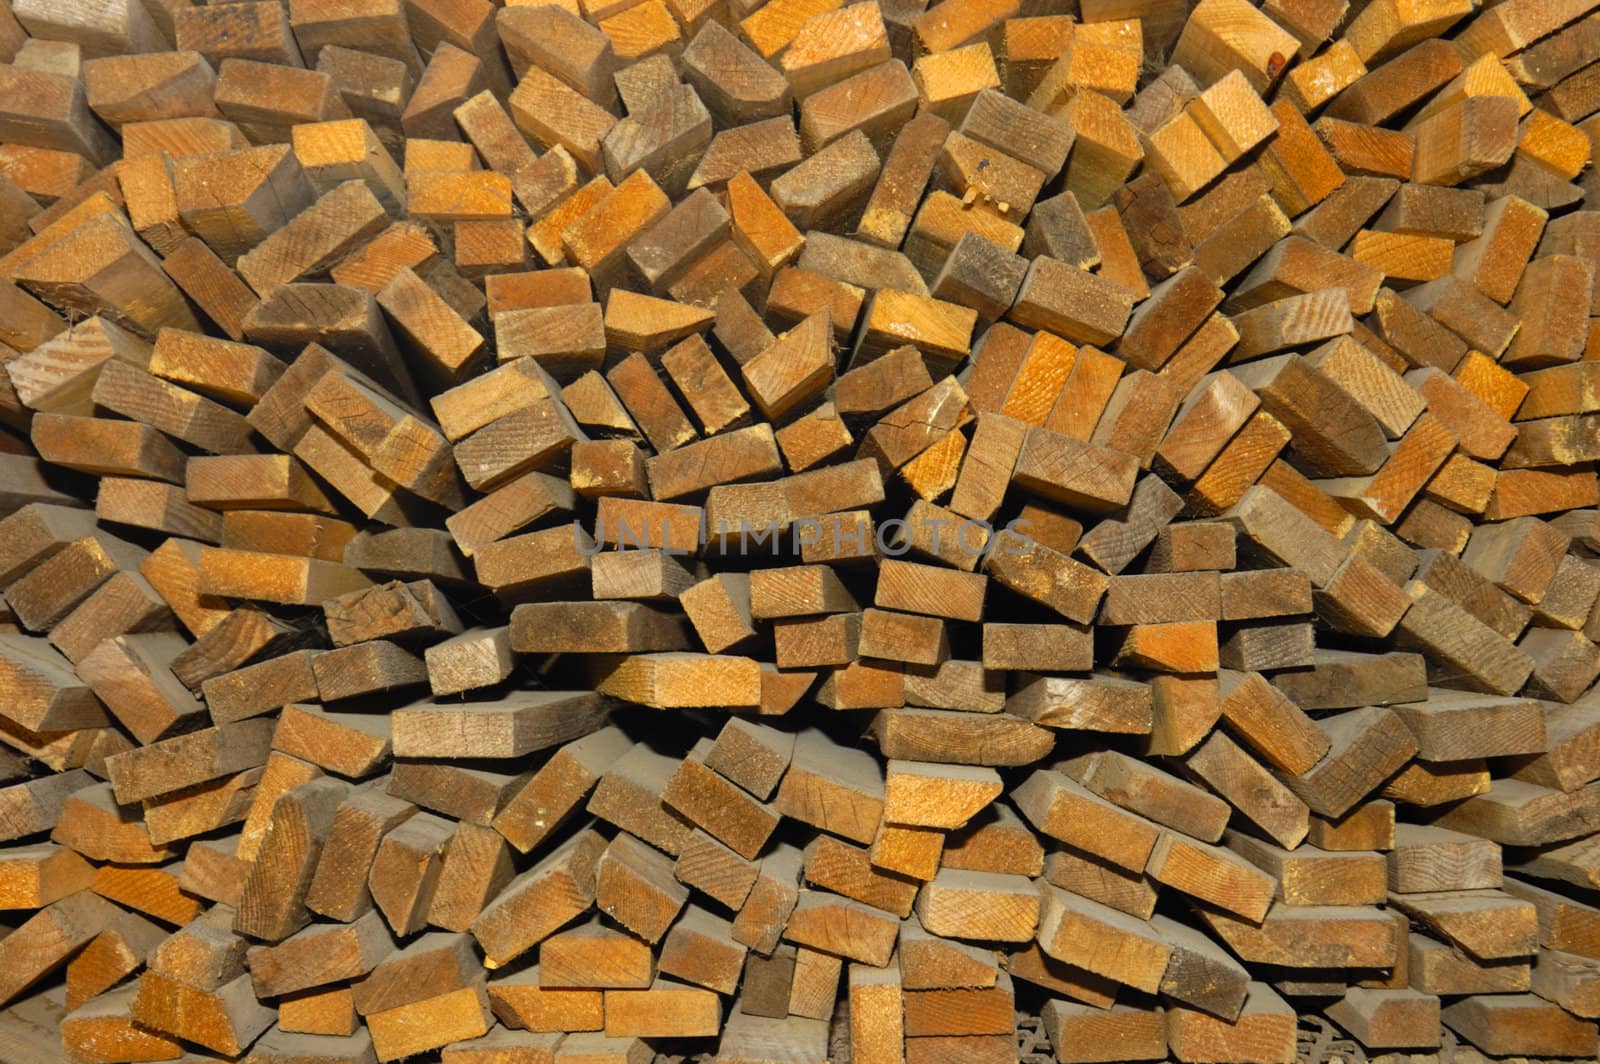 Close-up of the ends of different sizes of cut wood, piled up at a sawmill. Slight wide-angle effect makes pieces appear to radiate from centre.